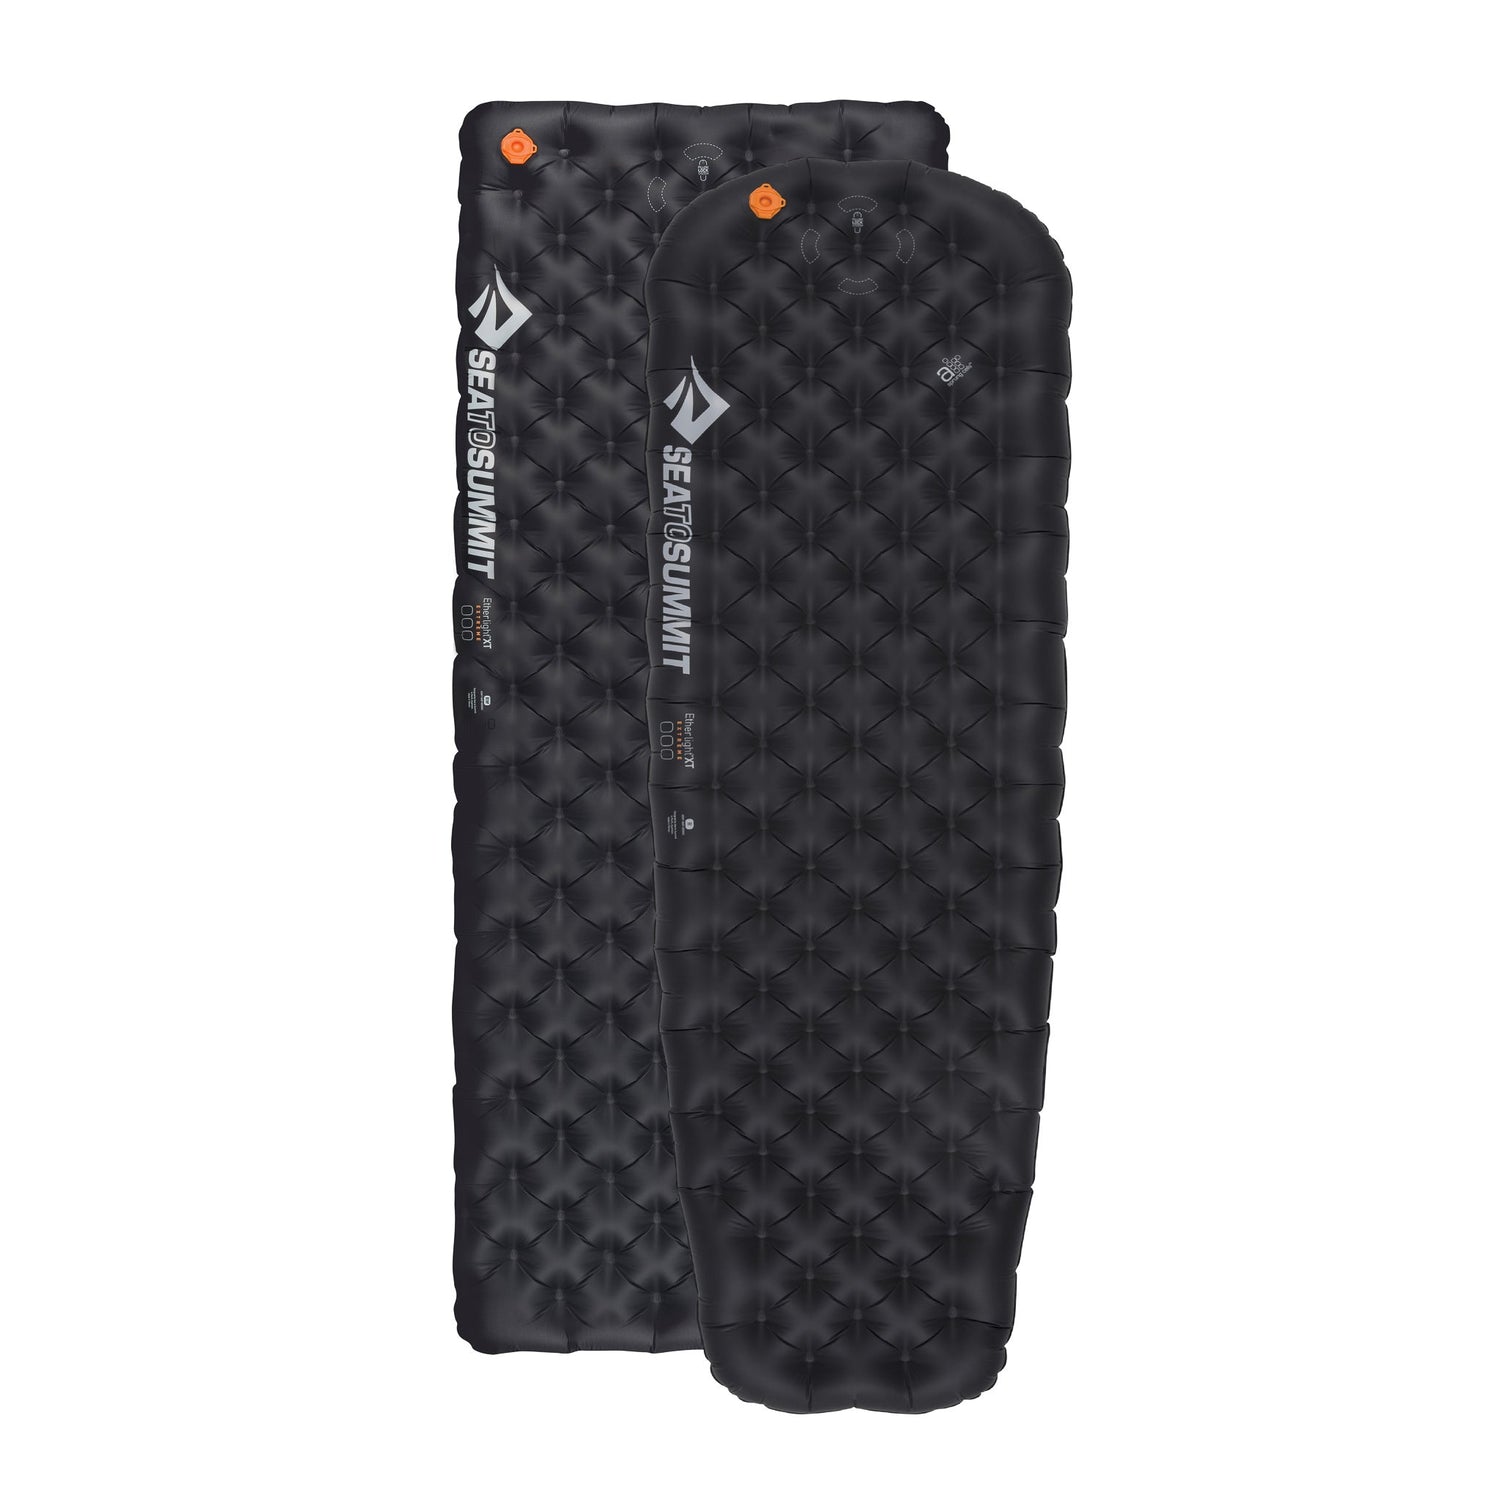 Ether Light XT Extreme Insulated Air Sleeping Pad